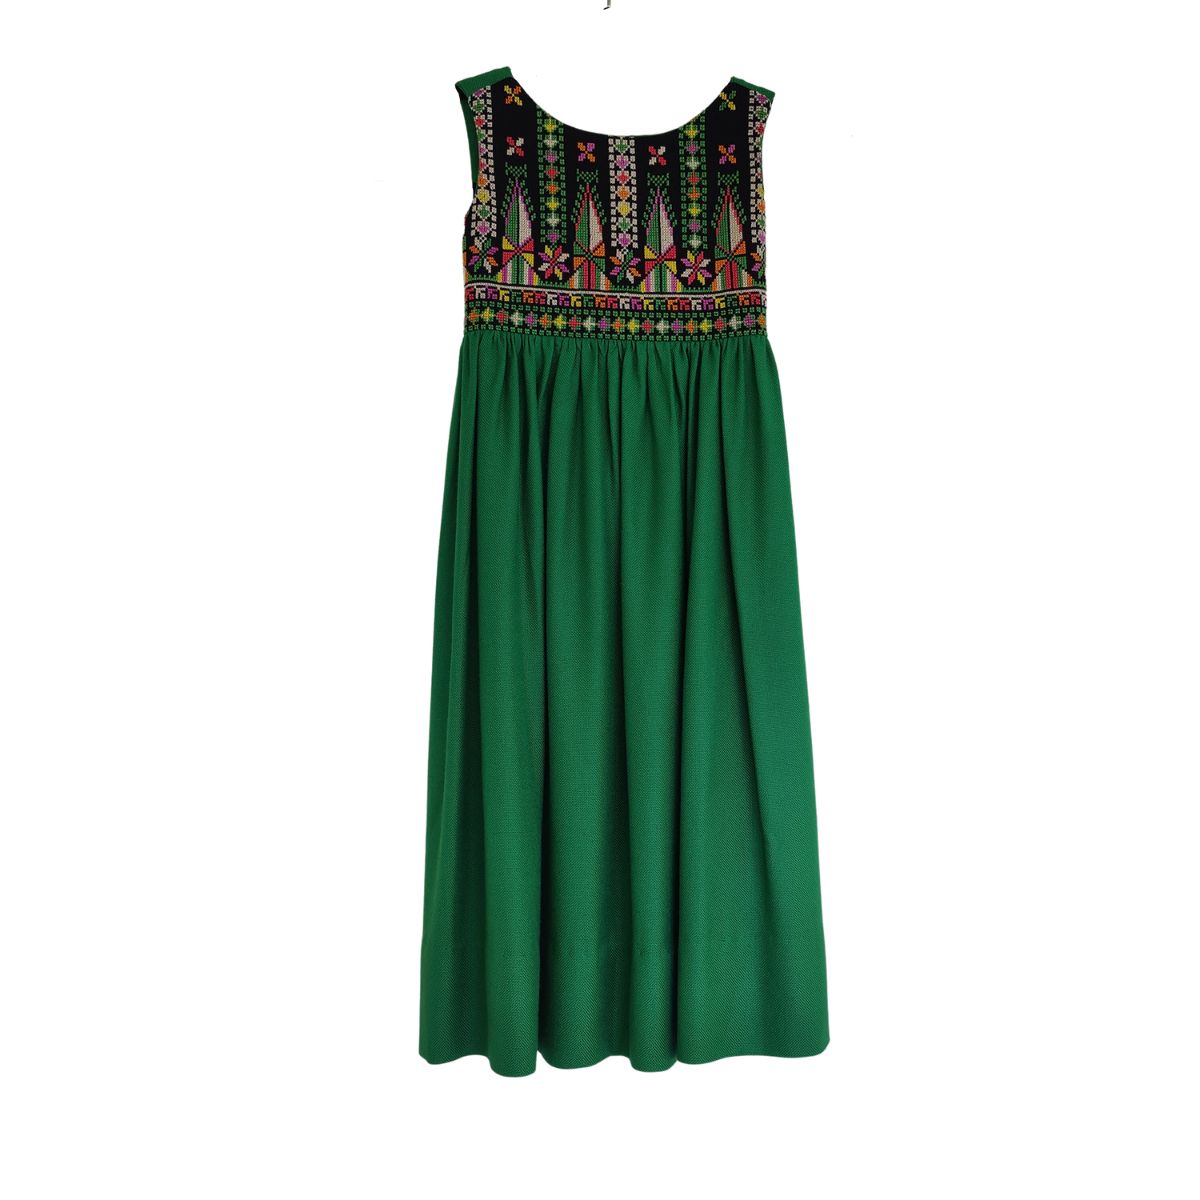 Embroidered Dress from Gaza, Green – Shop Palestine